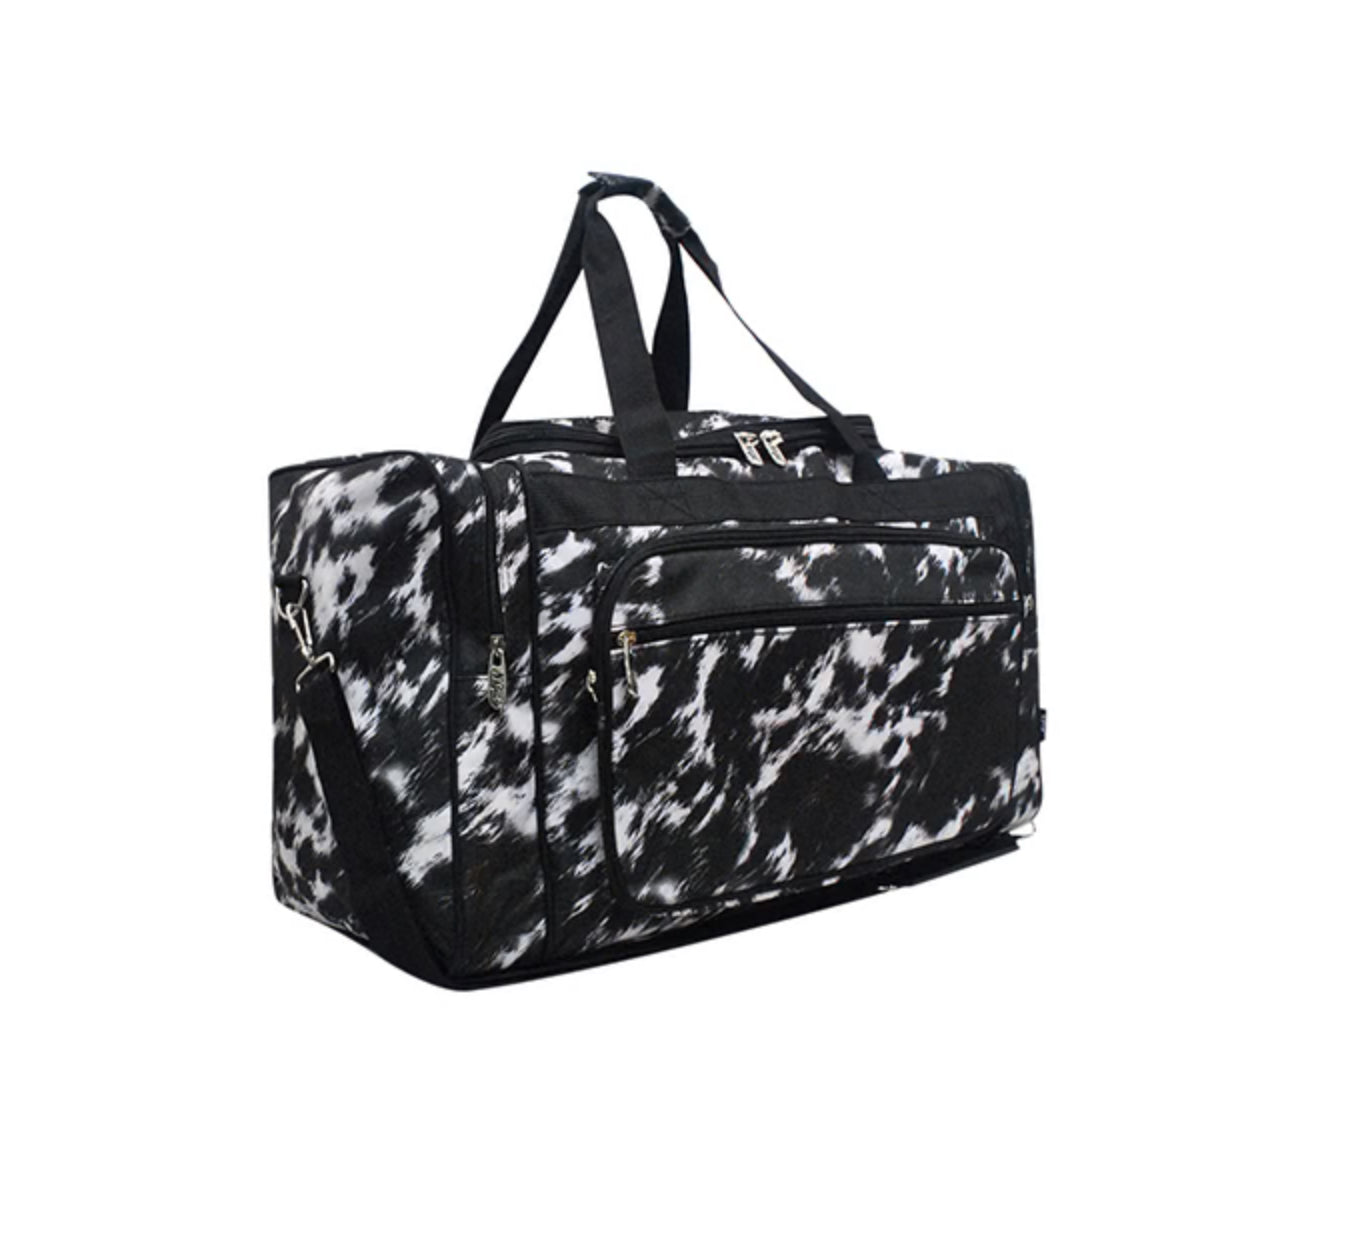 Cow Couture Canvas 23” Duffle Bag